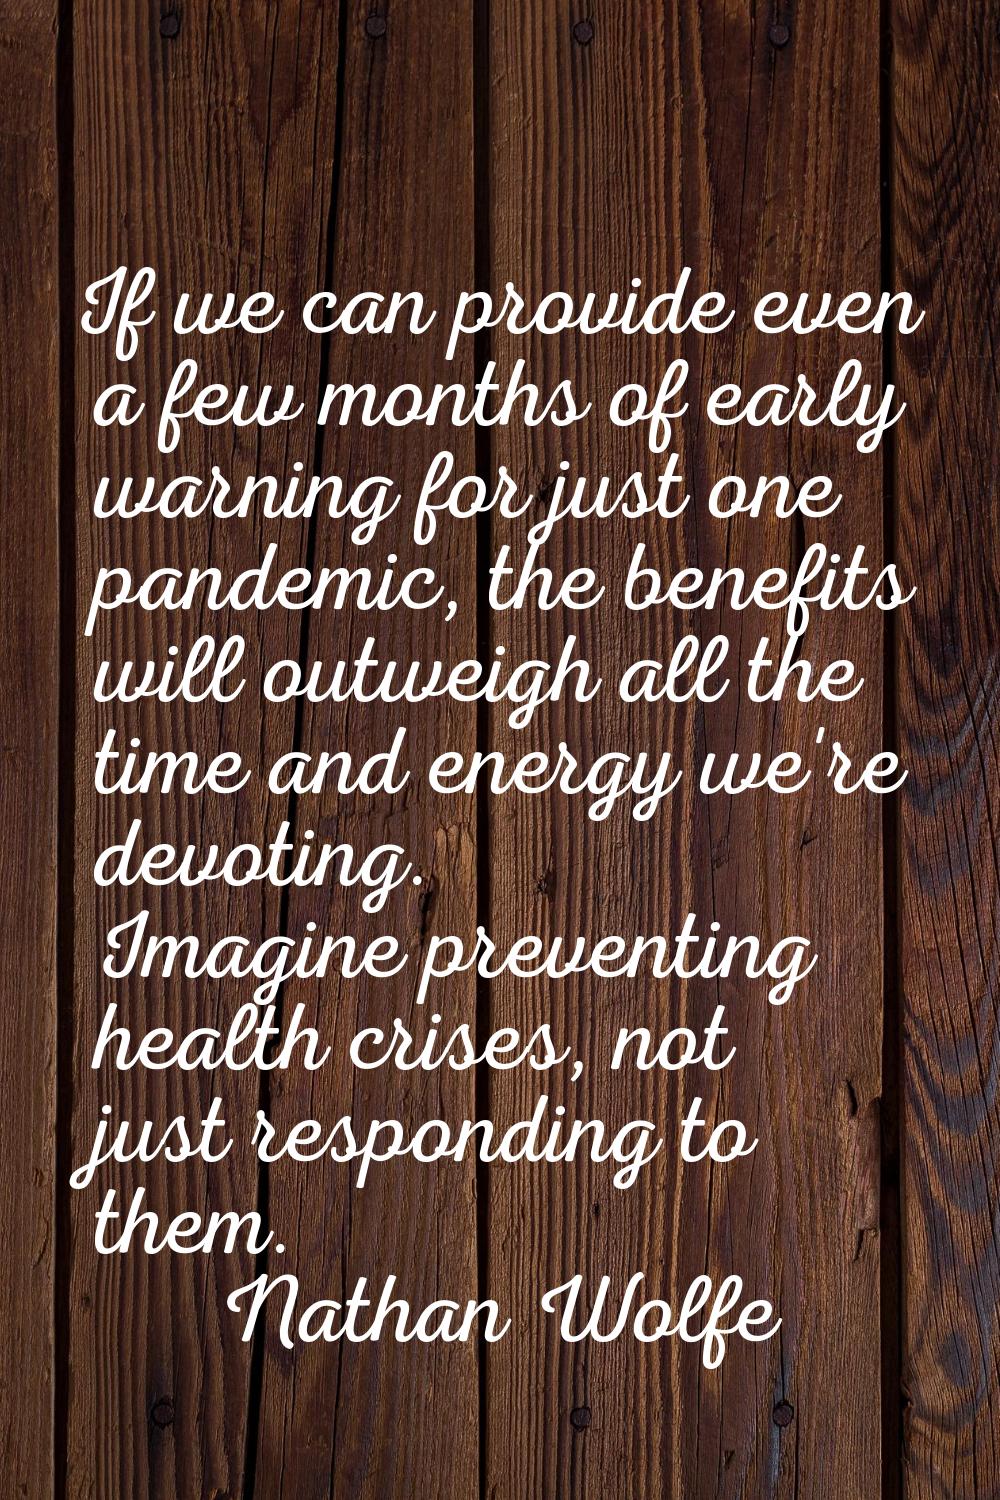 If we can provide even a few months of early warning for just one pandemic, the benefits will outwe